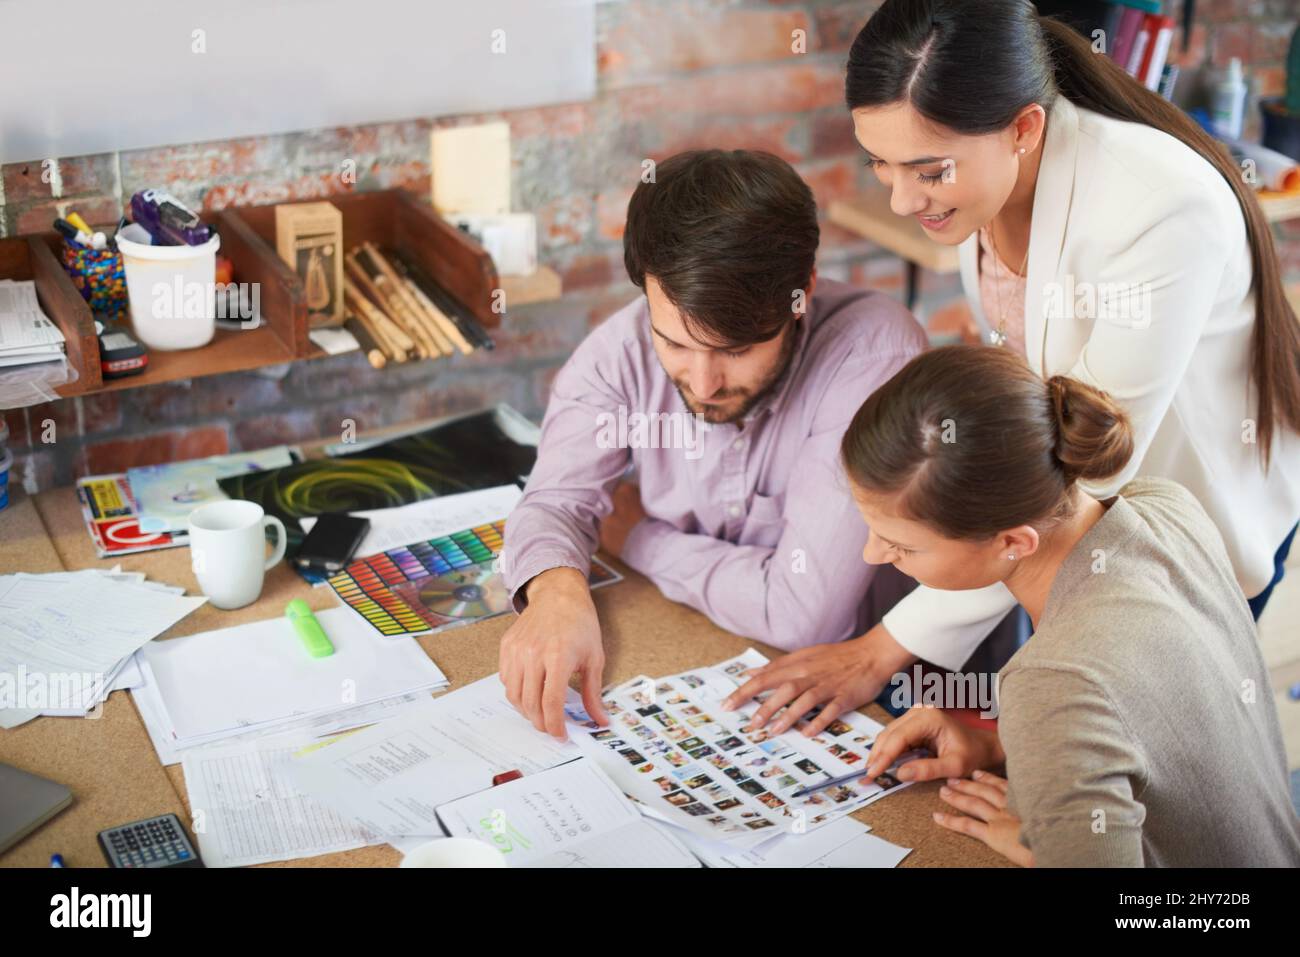 Moving forward on their next campaigne. Young creative professionals working in an office. Stock Photo